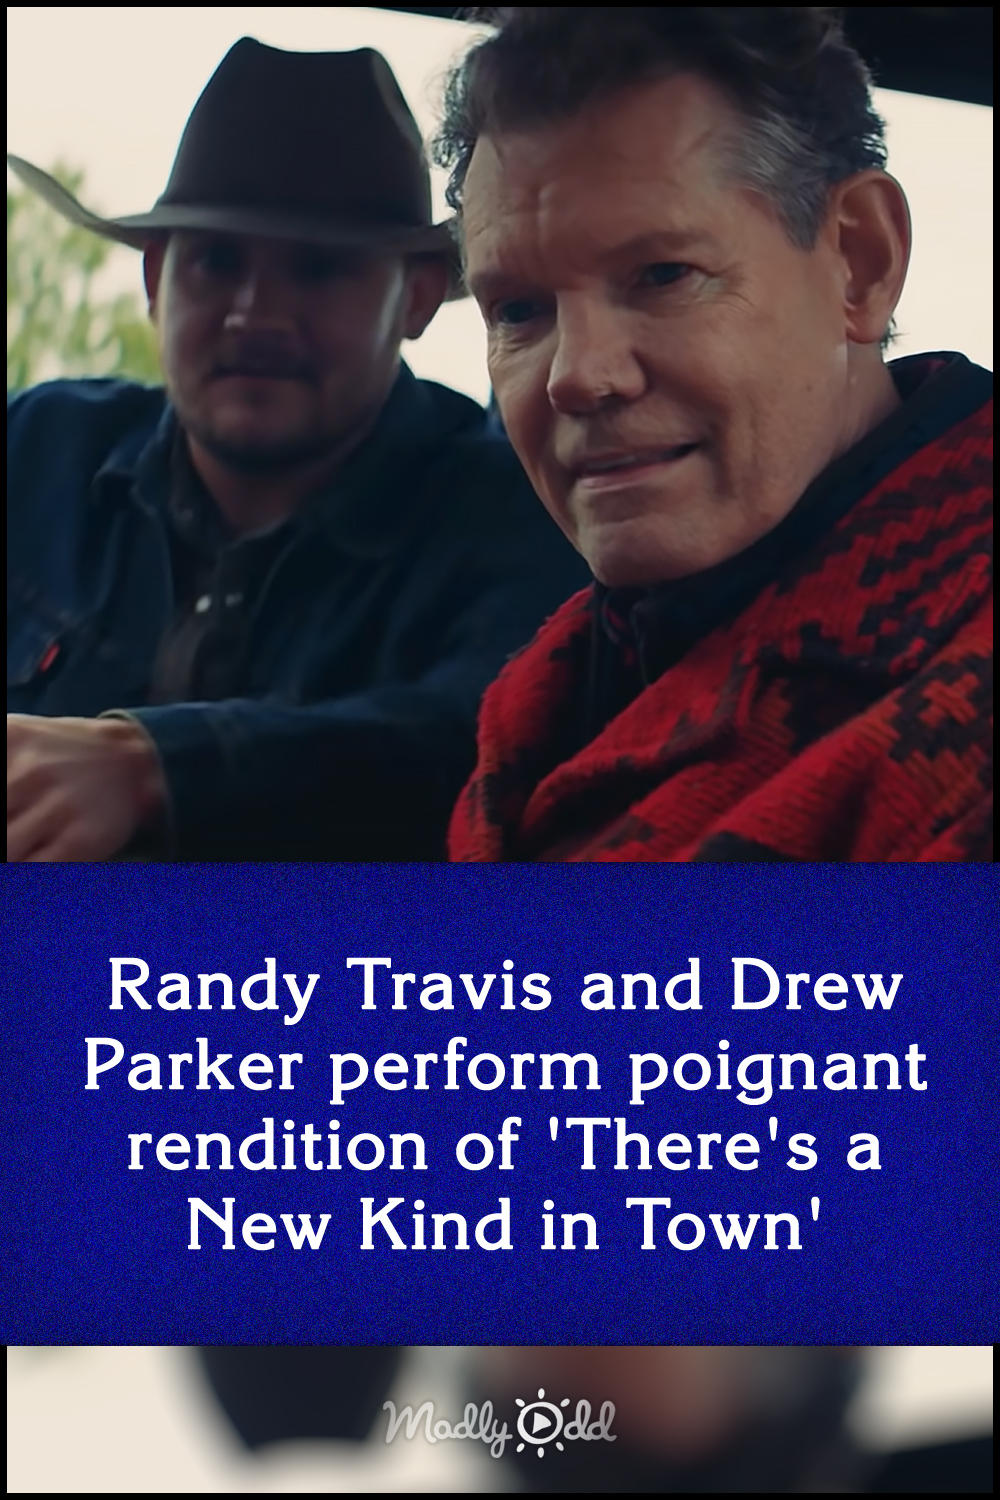 Randy Travis and Drew Parker perform poignant rendition of \'There\'s a New Kid in Town\'